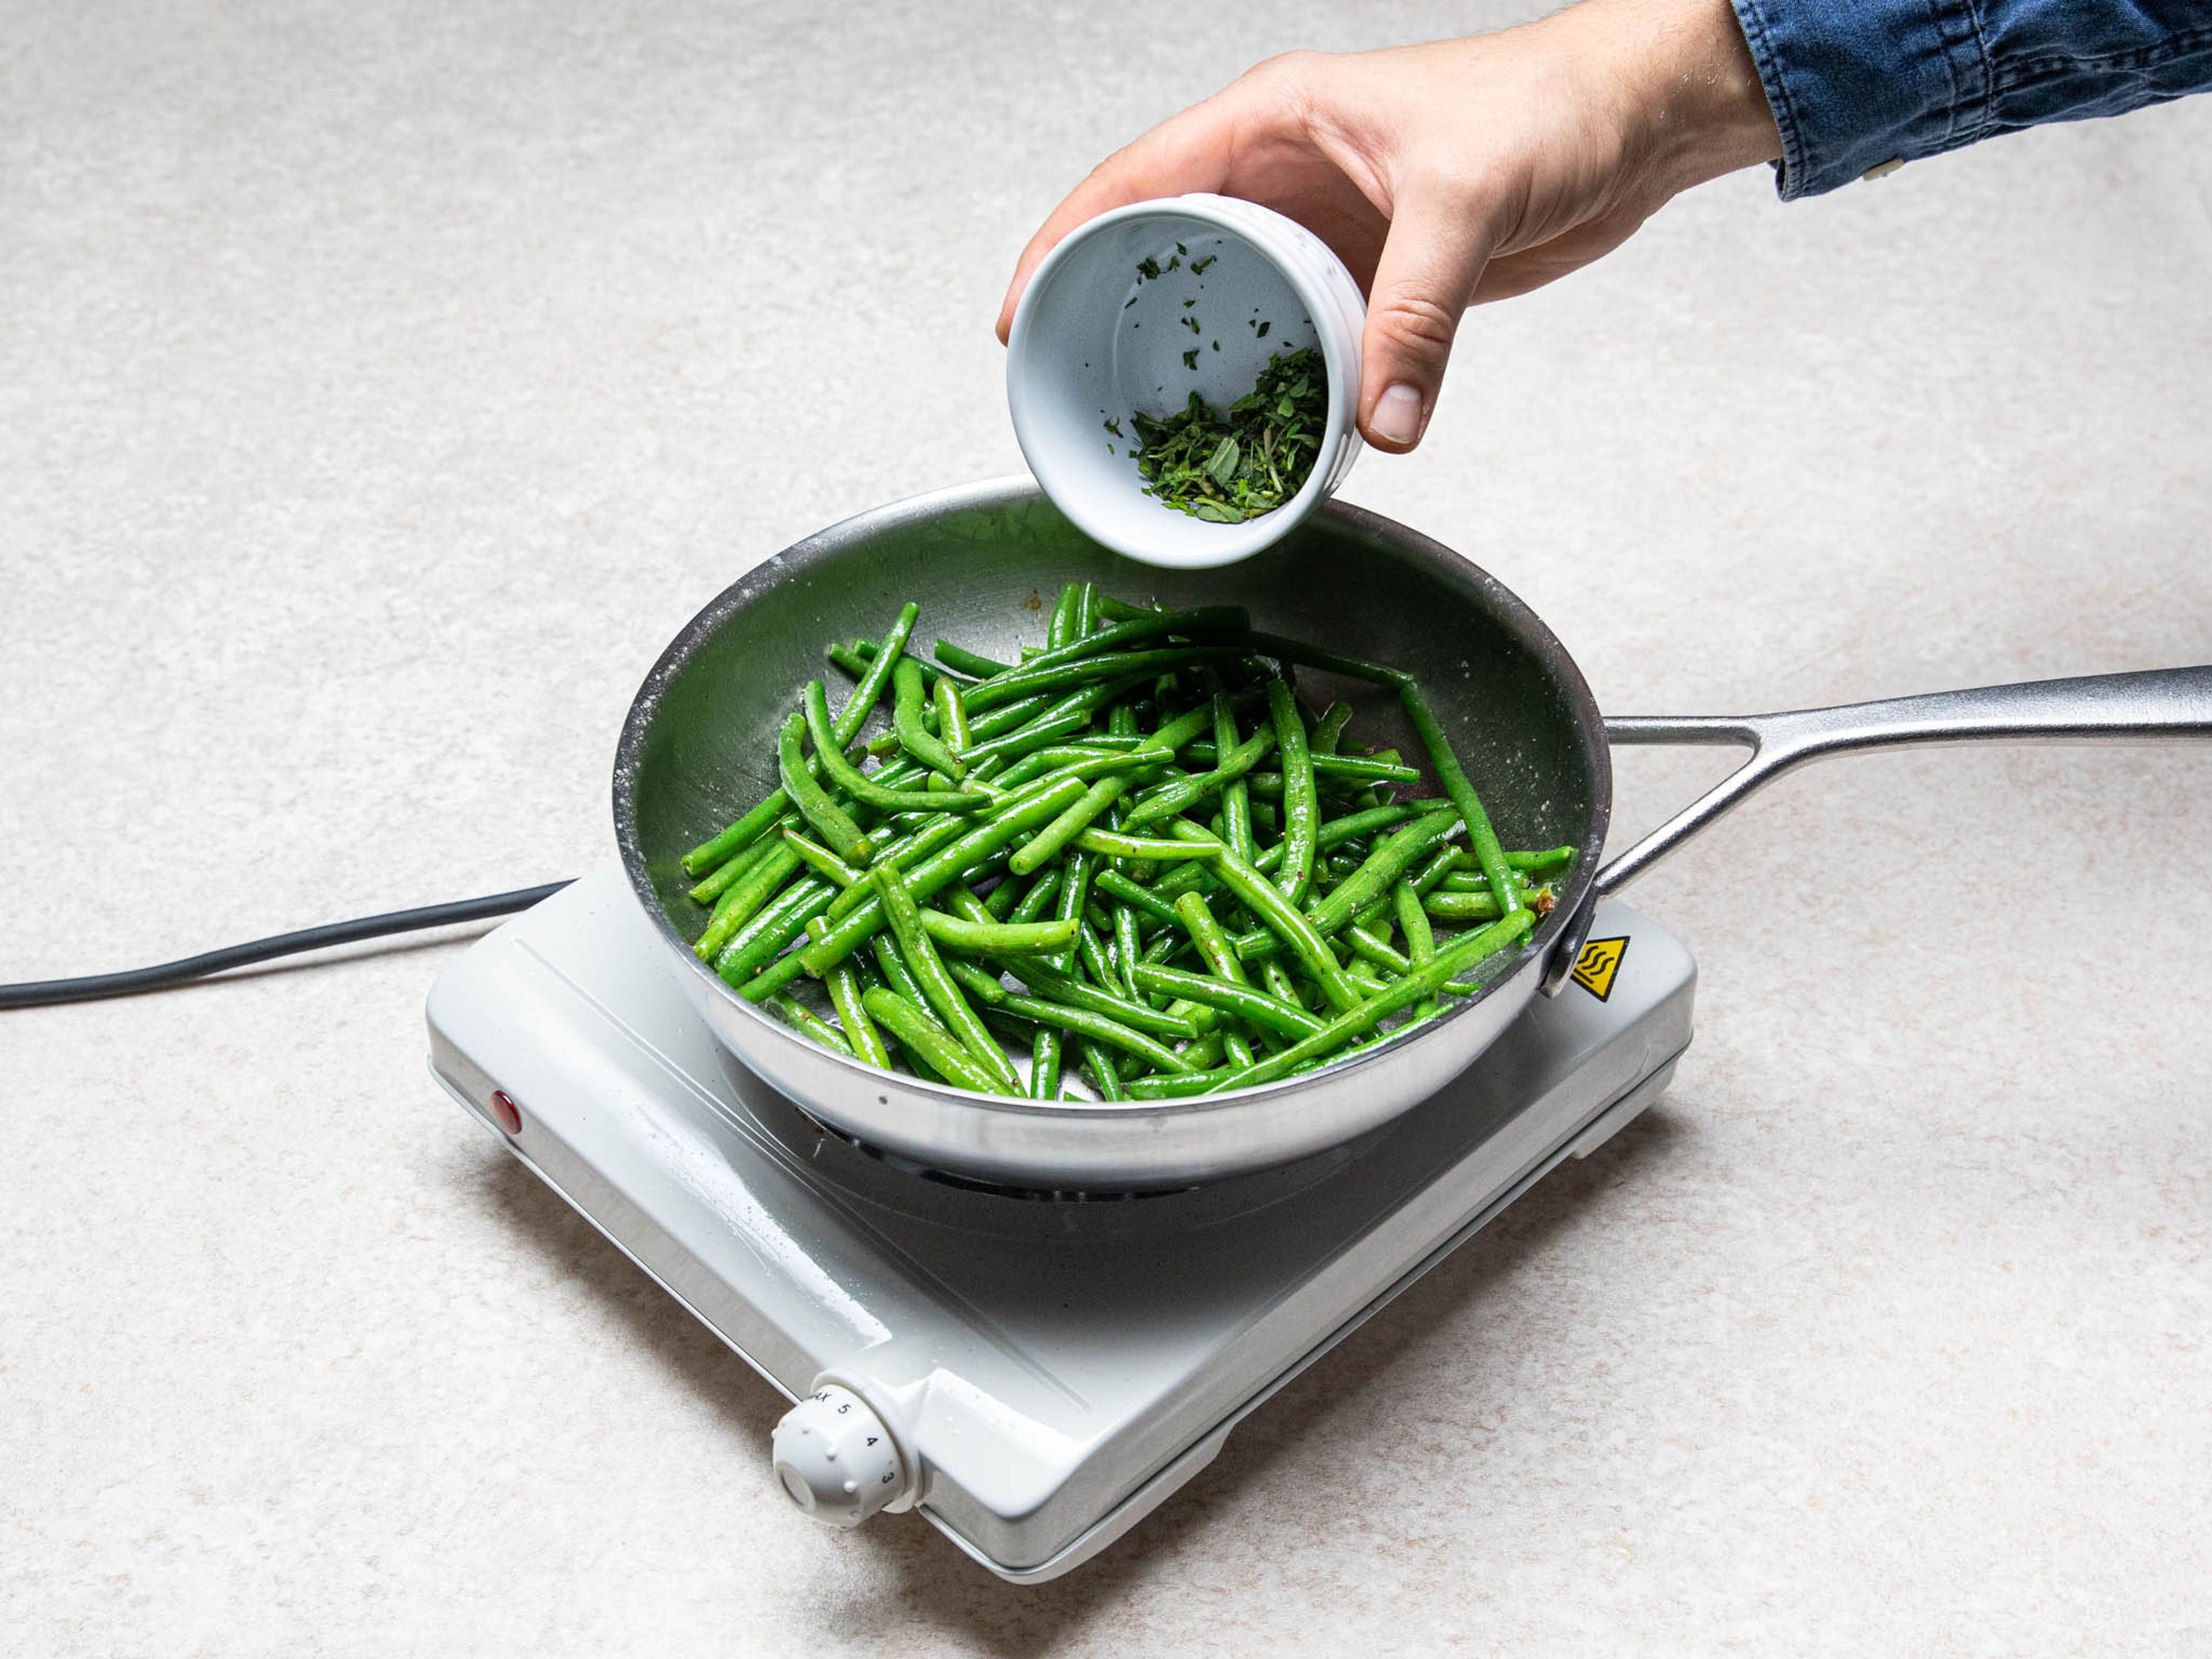 Fry blanched green beans in a frying pan with some butter. Season with salt and pepper to taste, then toss with summer savory. Serve meatballs with broth, boiled potatoes, and green beans. Enjoy!